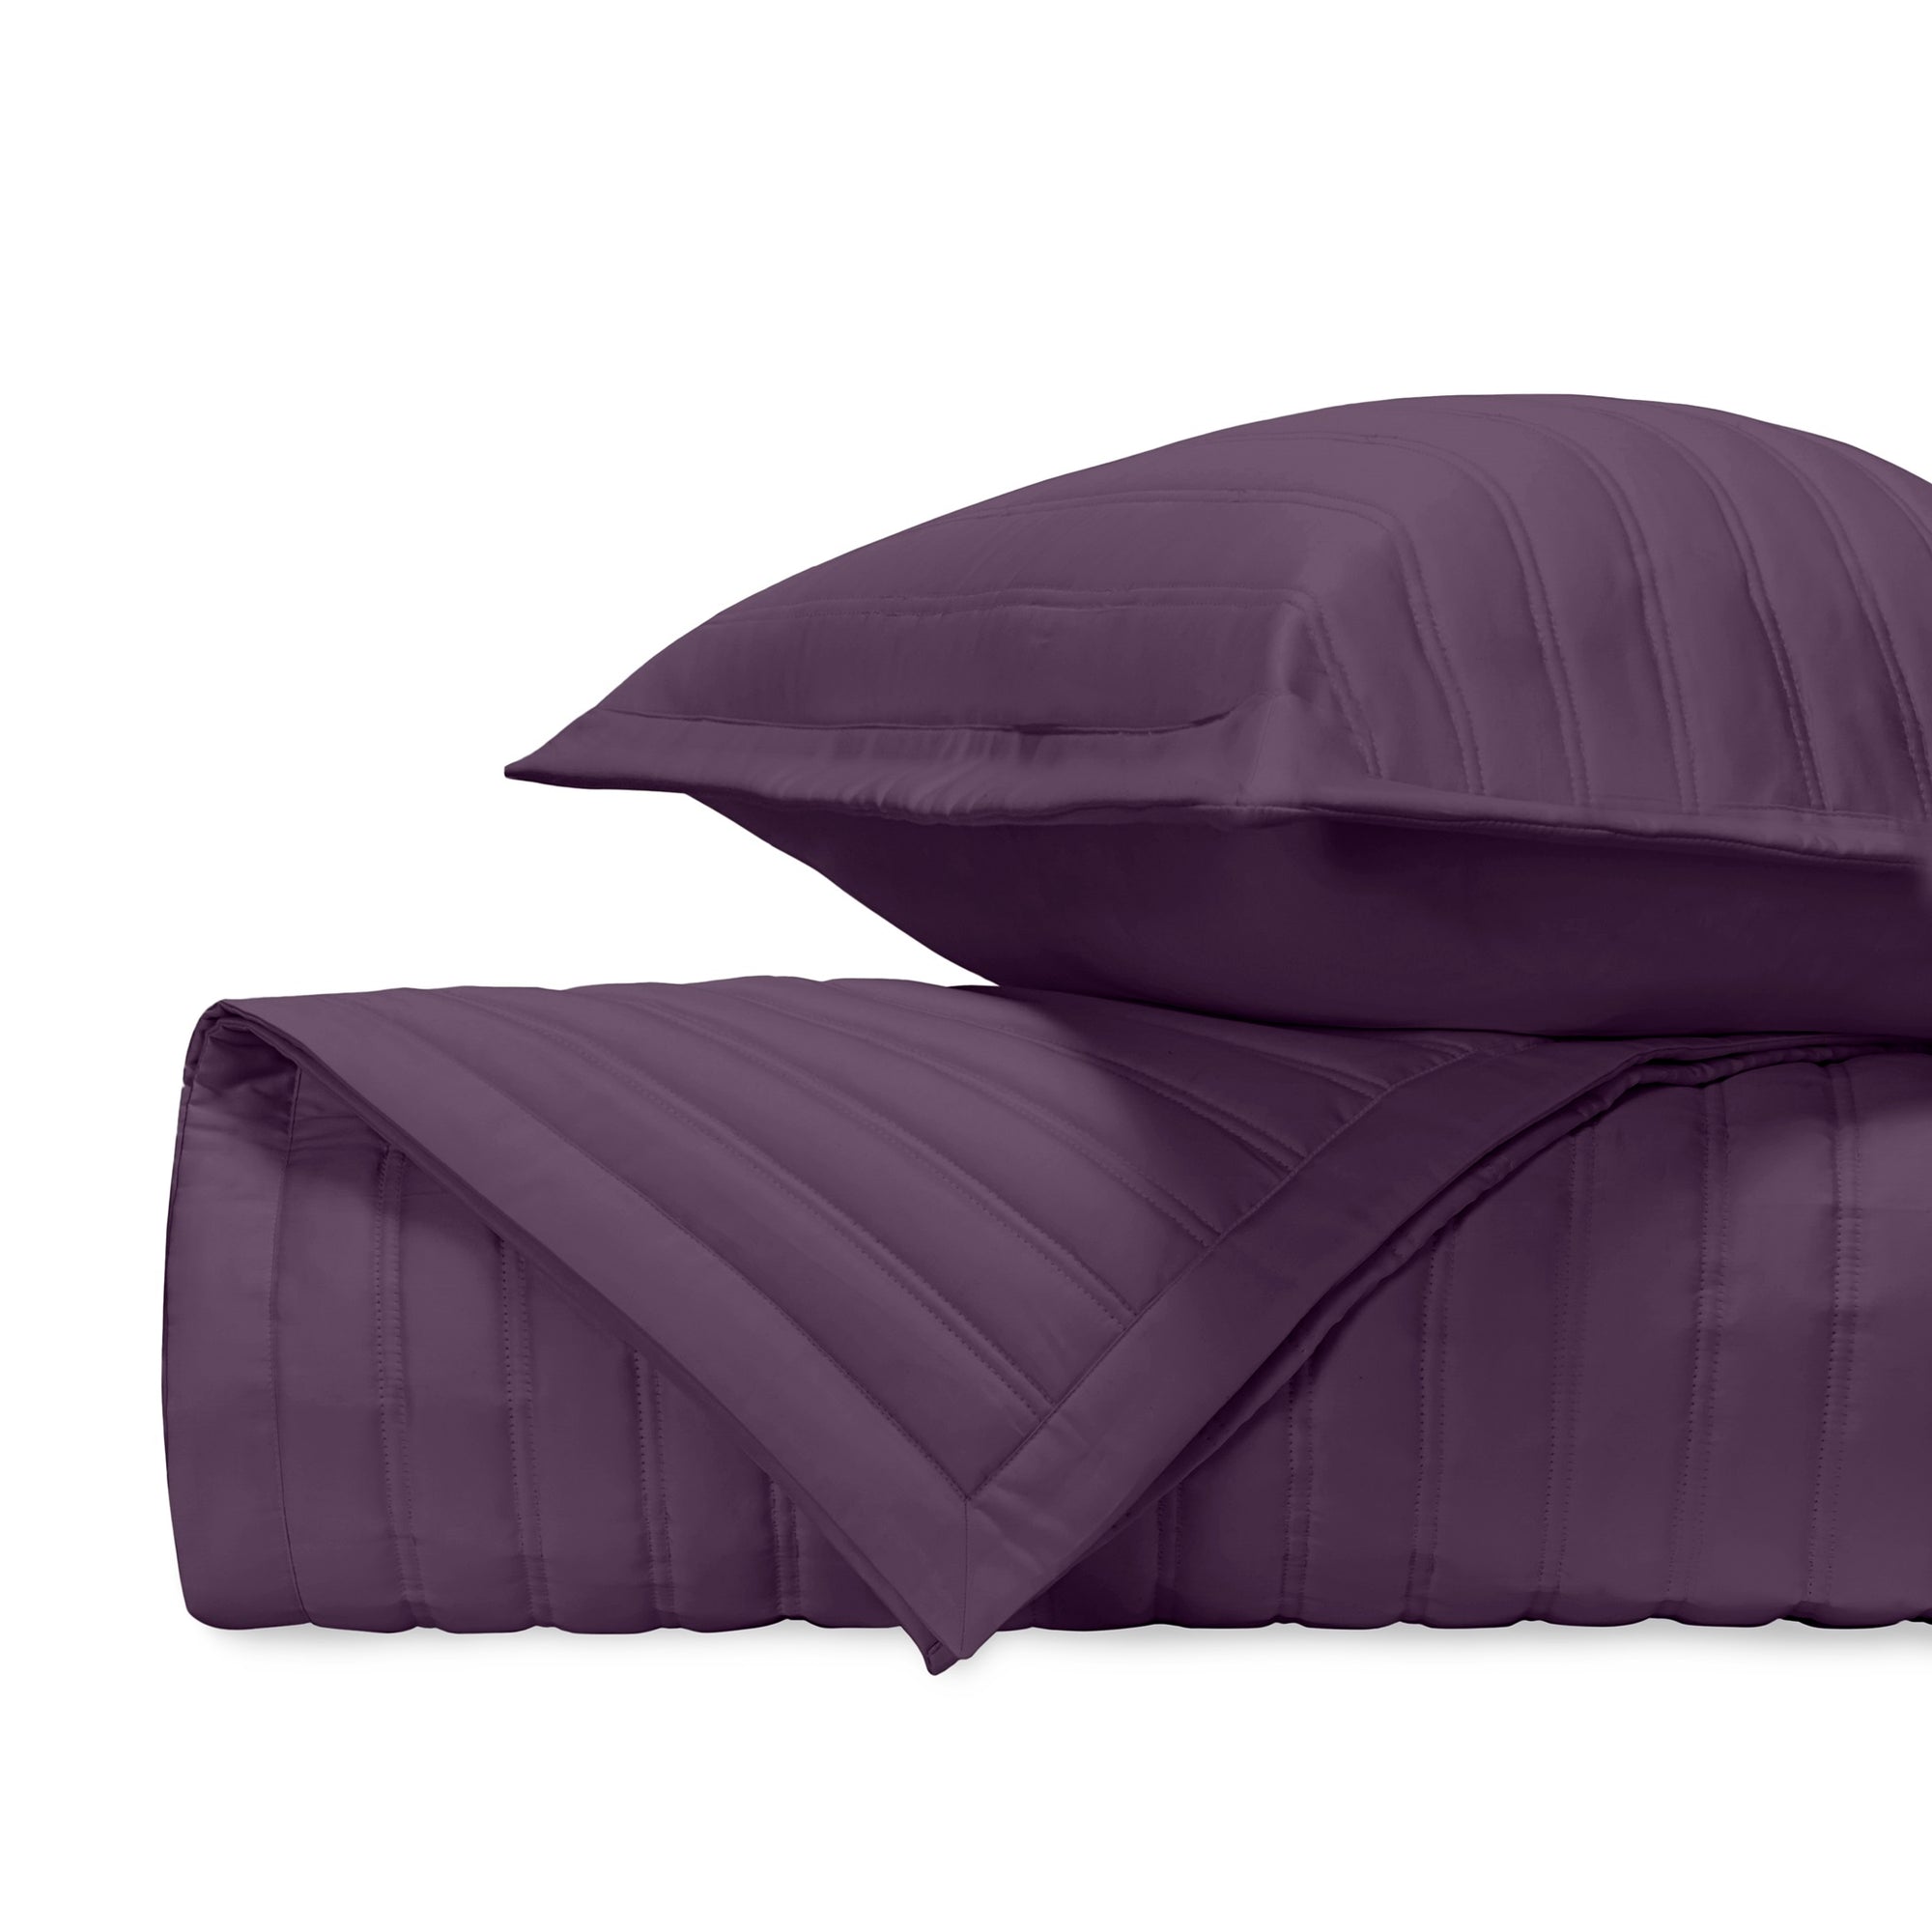 Stack Image of Home Treasures L'Avenue Royal Sateen Quilted Bedding in Color Purple